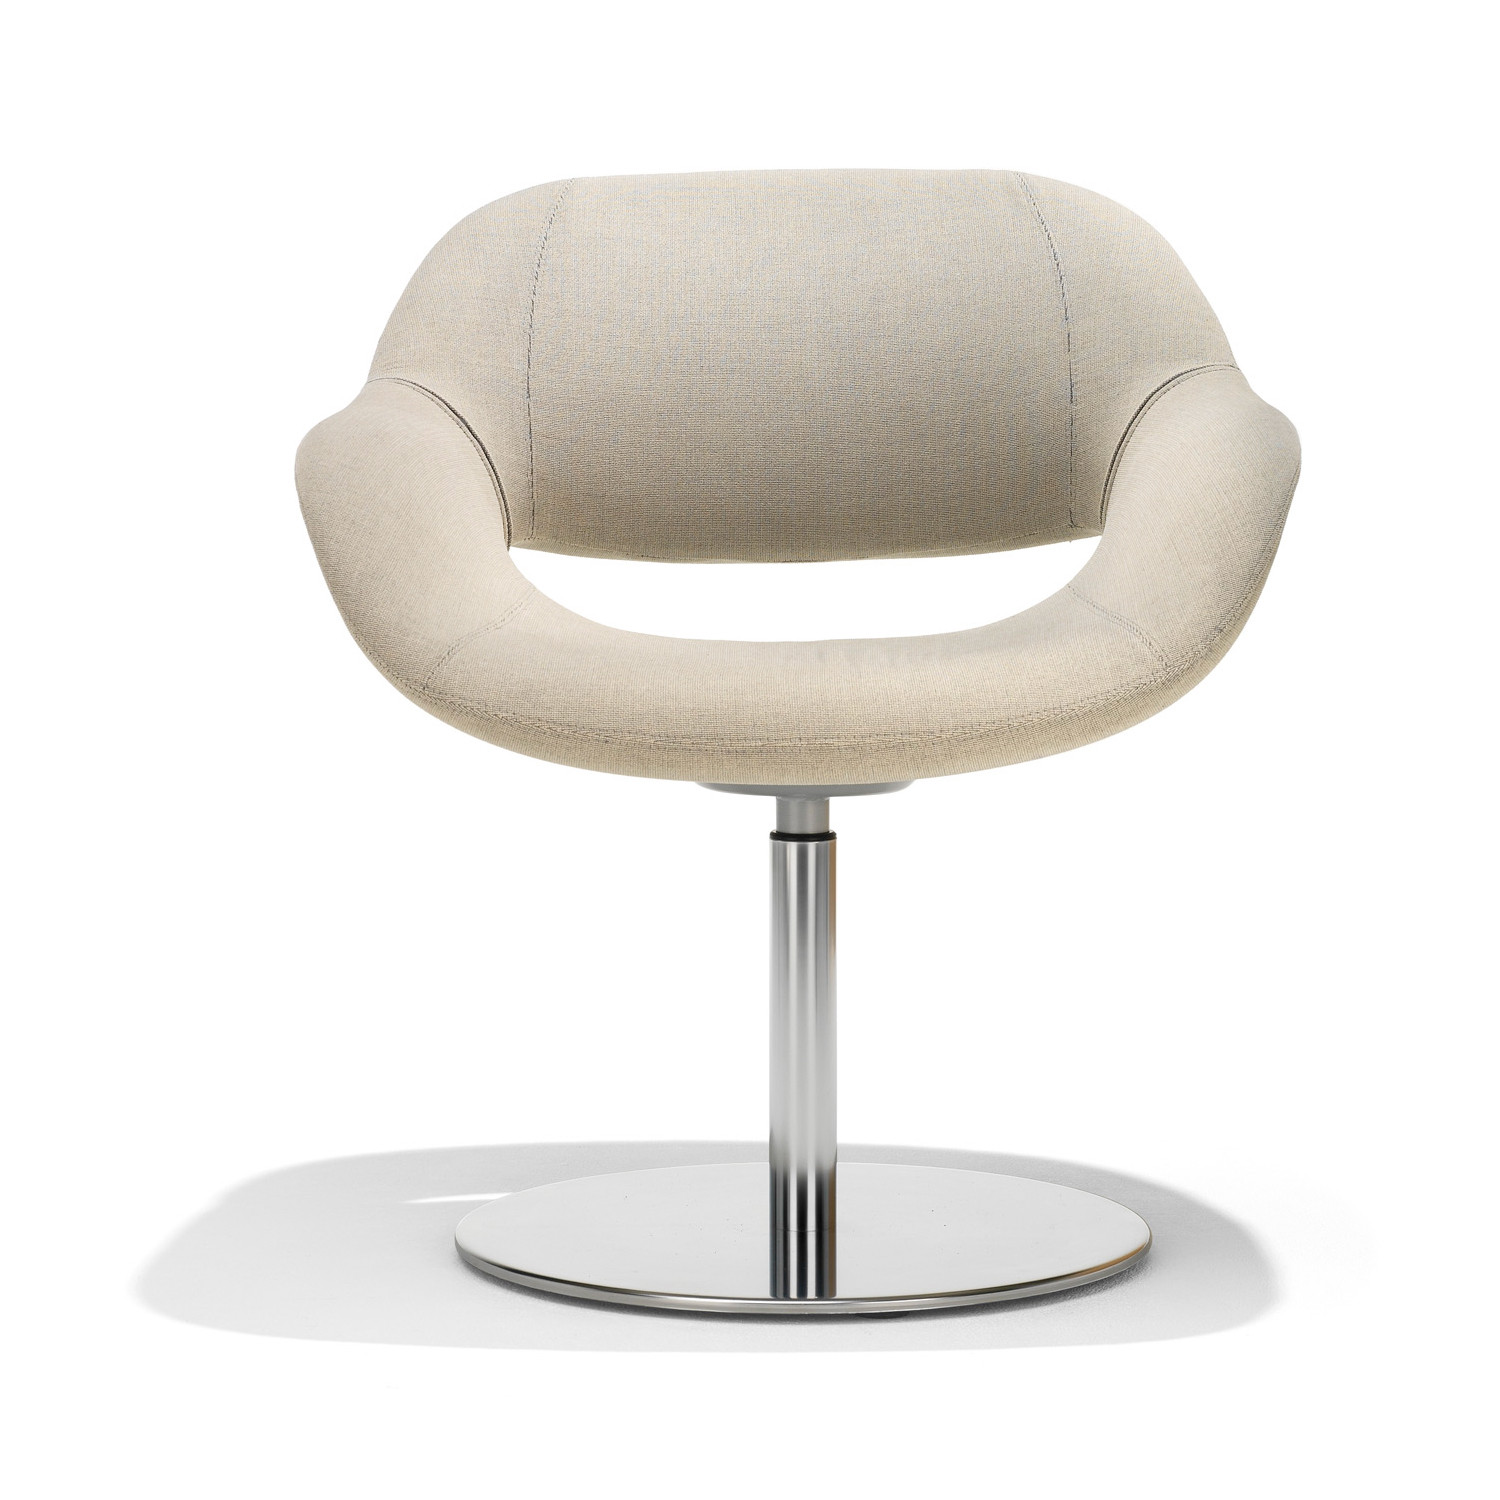 8200 Volpe Armchair with round base plate